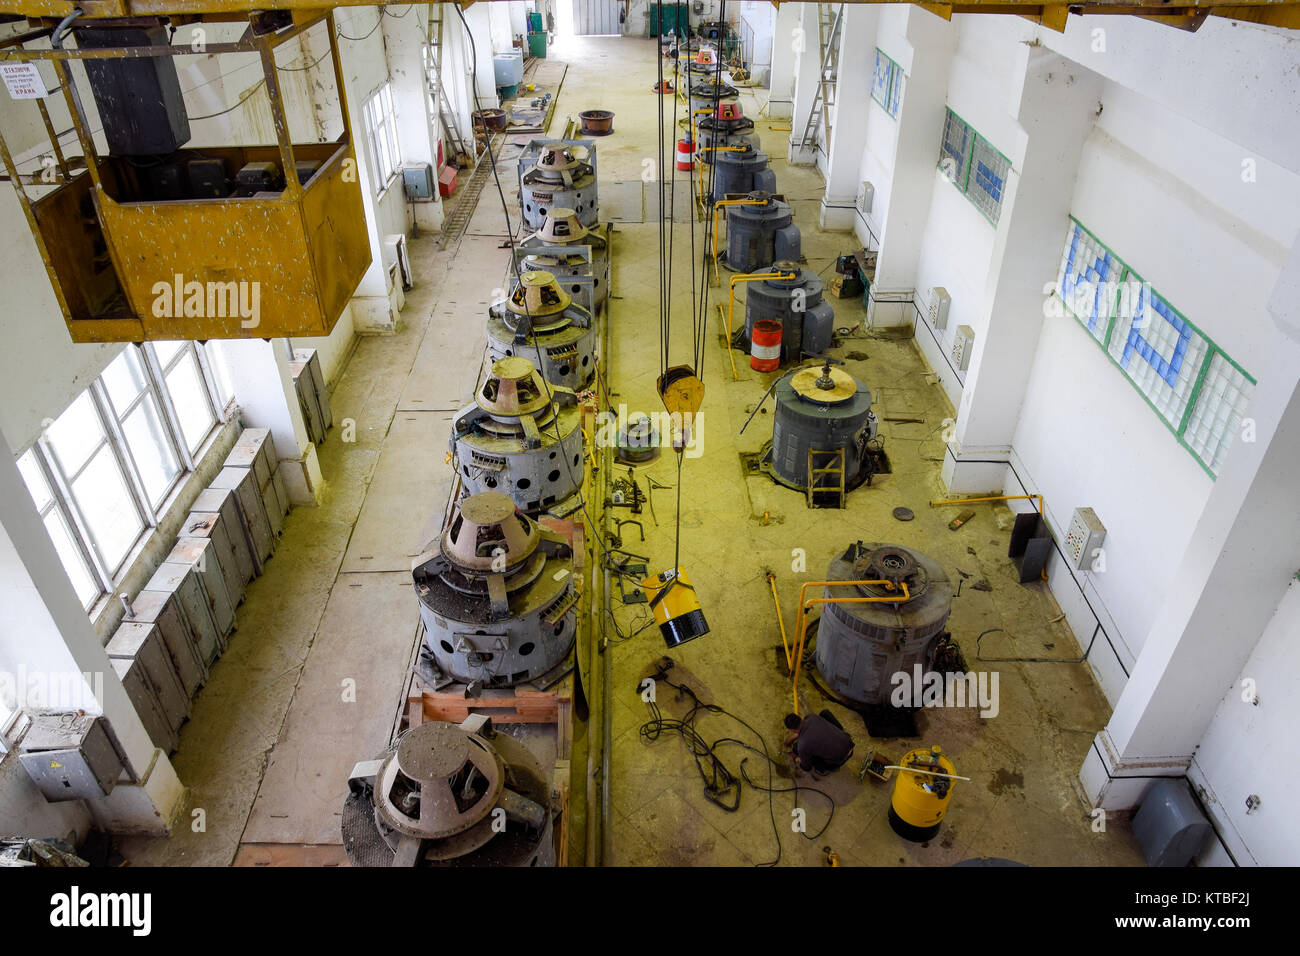 Engines of water pumps at a water pumping station. Pumping irrig Stock Photo